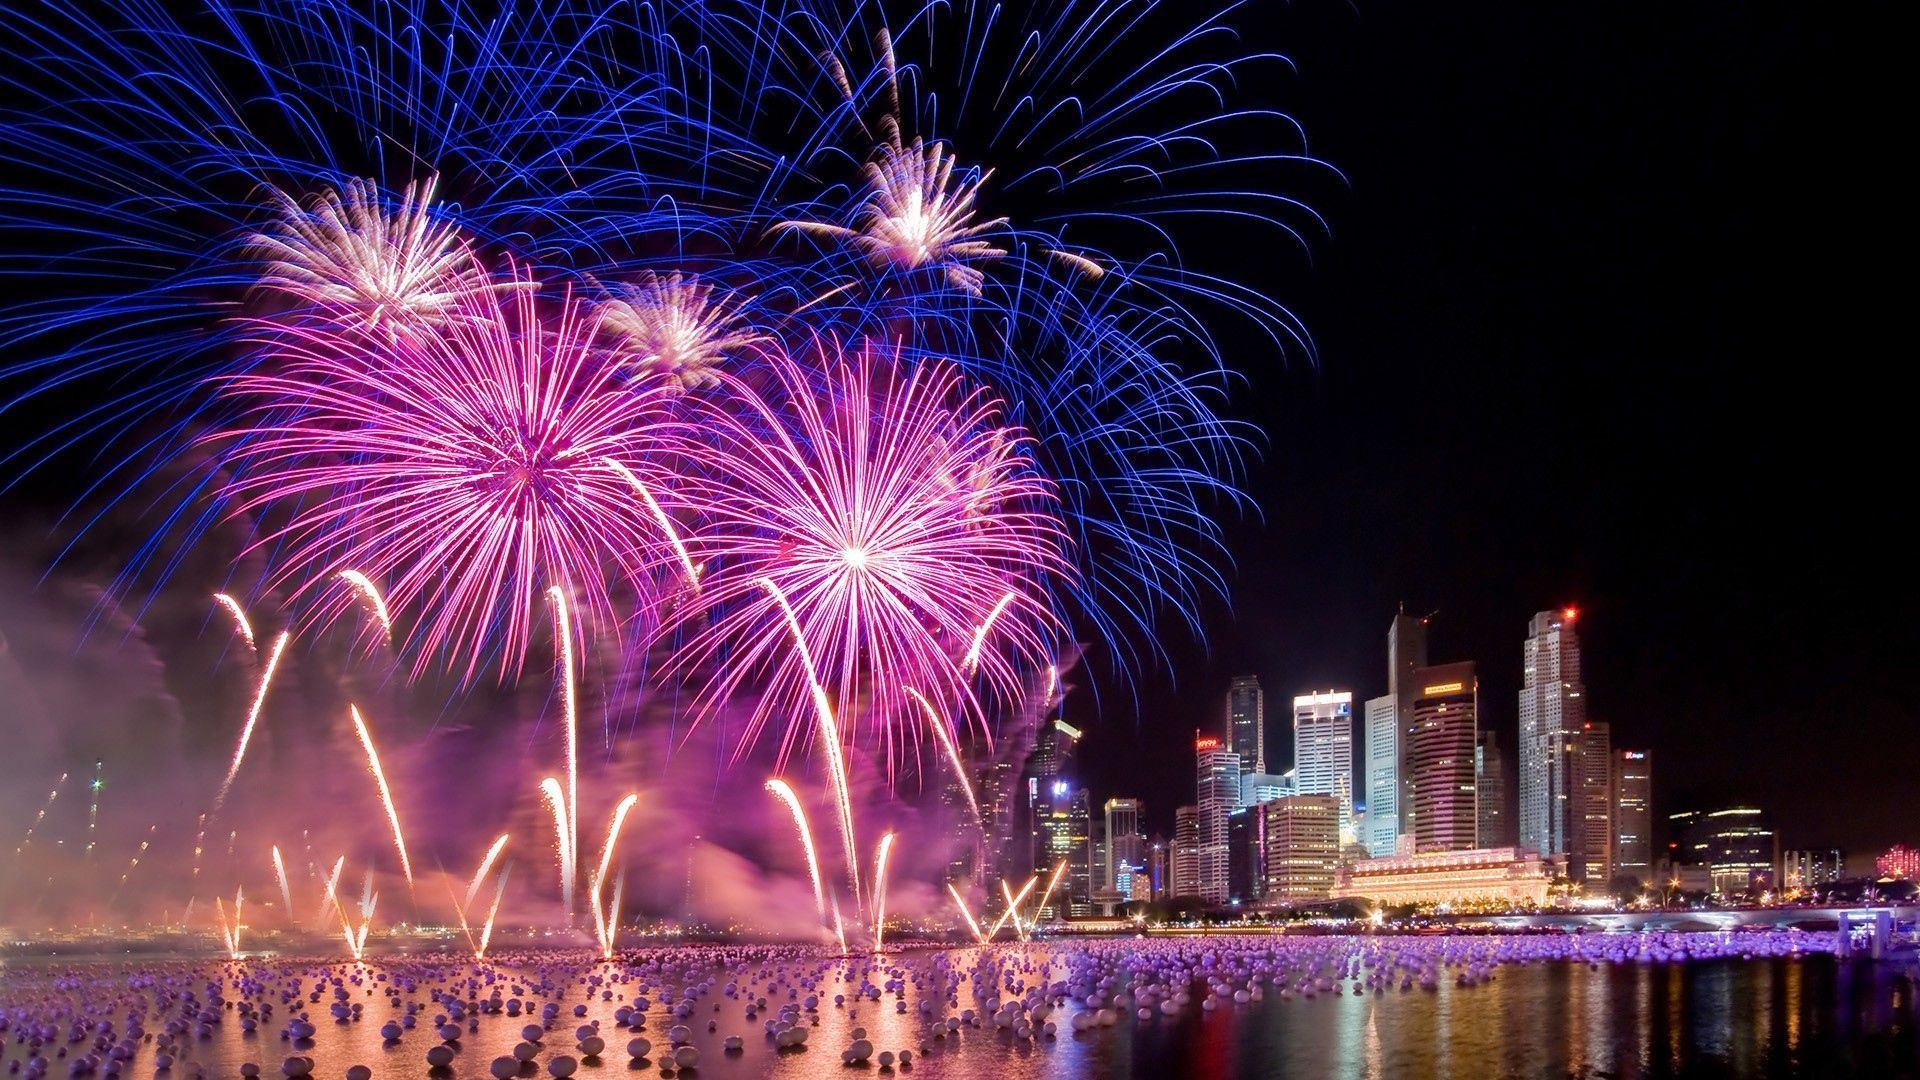 Download Wallpaper 1920x1080 City, Holiday, Night, Sky, Fireworks